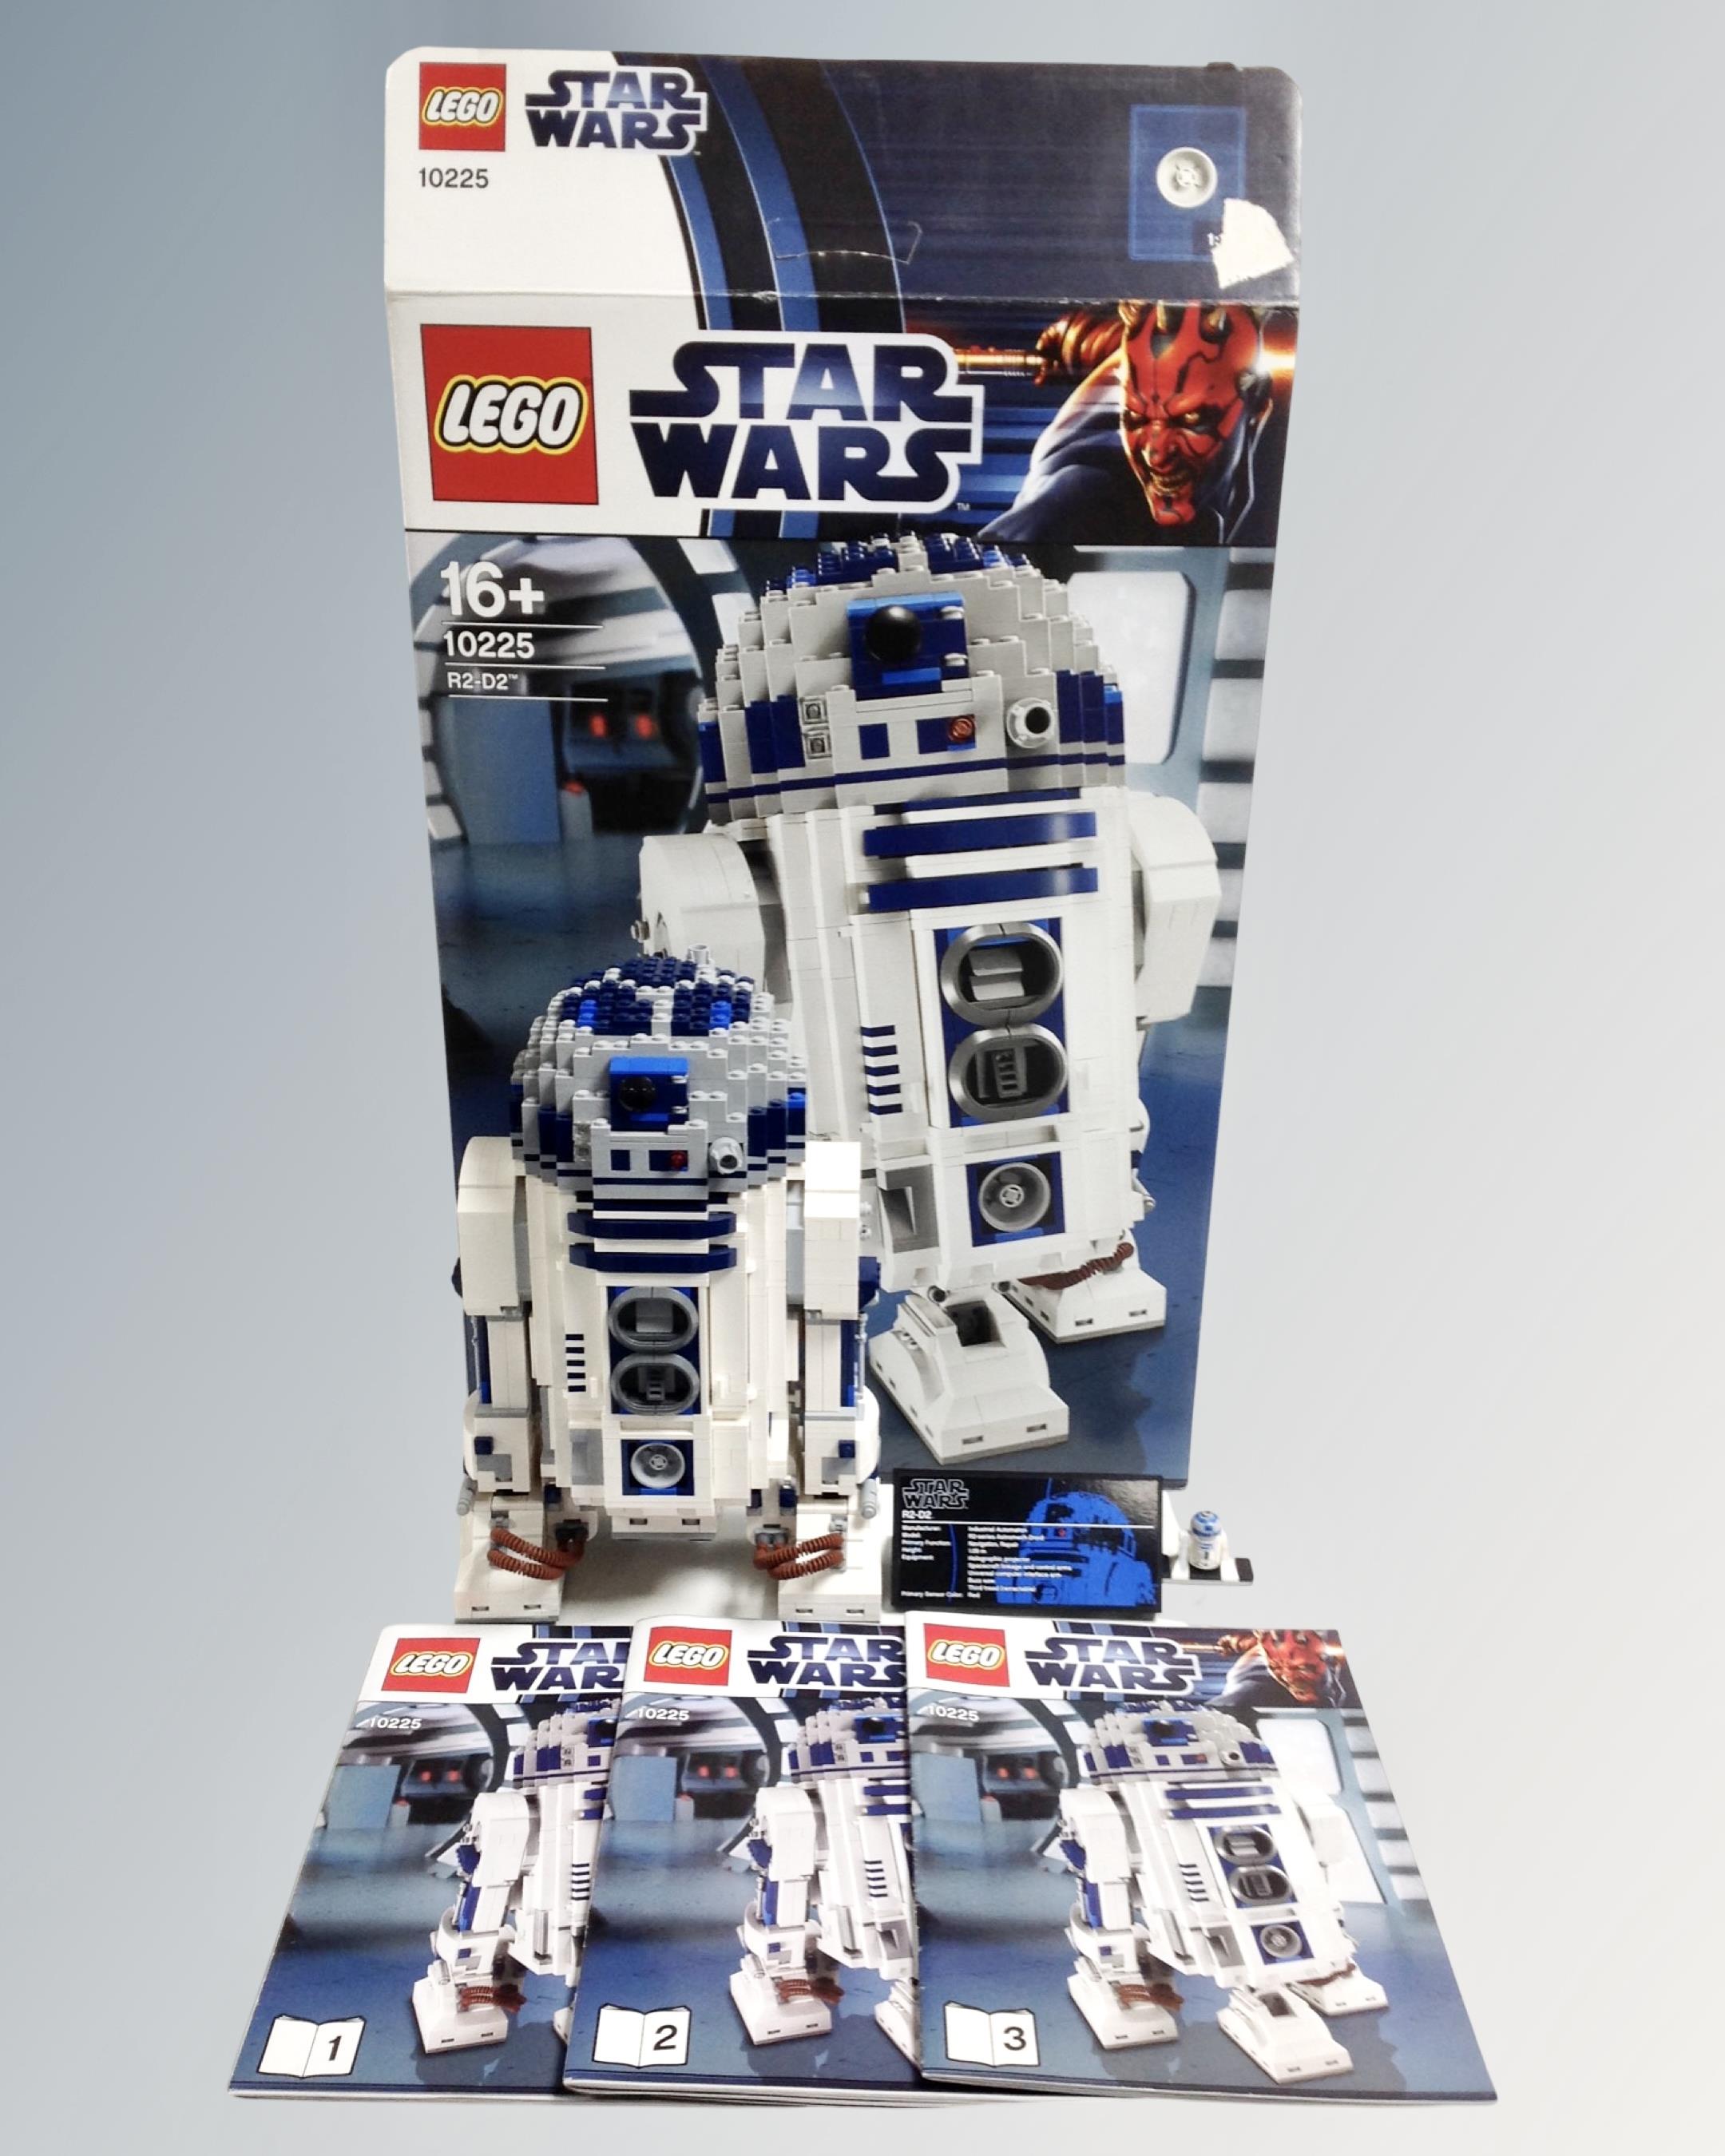 A Lego Star Wars 10225 R2-D2 with box and instructions.